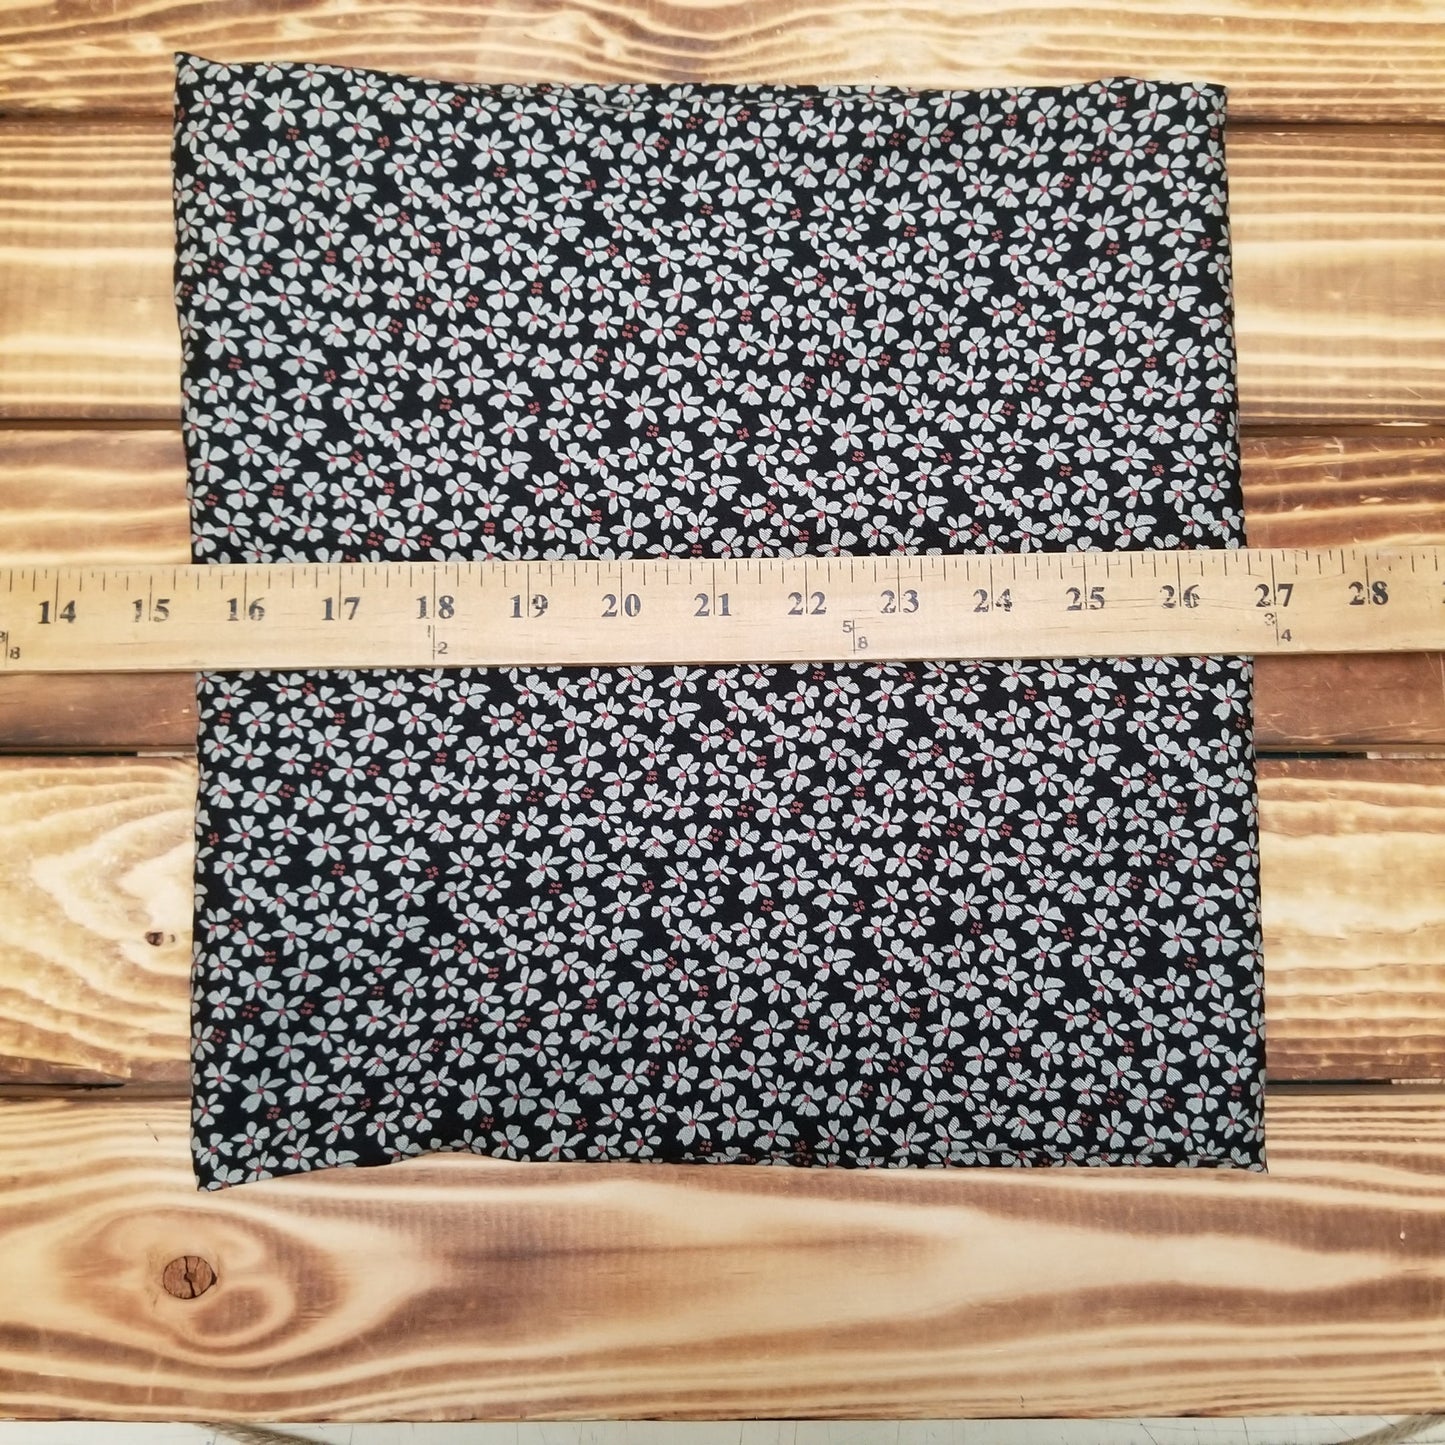 End of Bolt: 1-3/4th yards of Designer Deadstock Premium Rayon Black Small Floral Woven- remnant